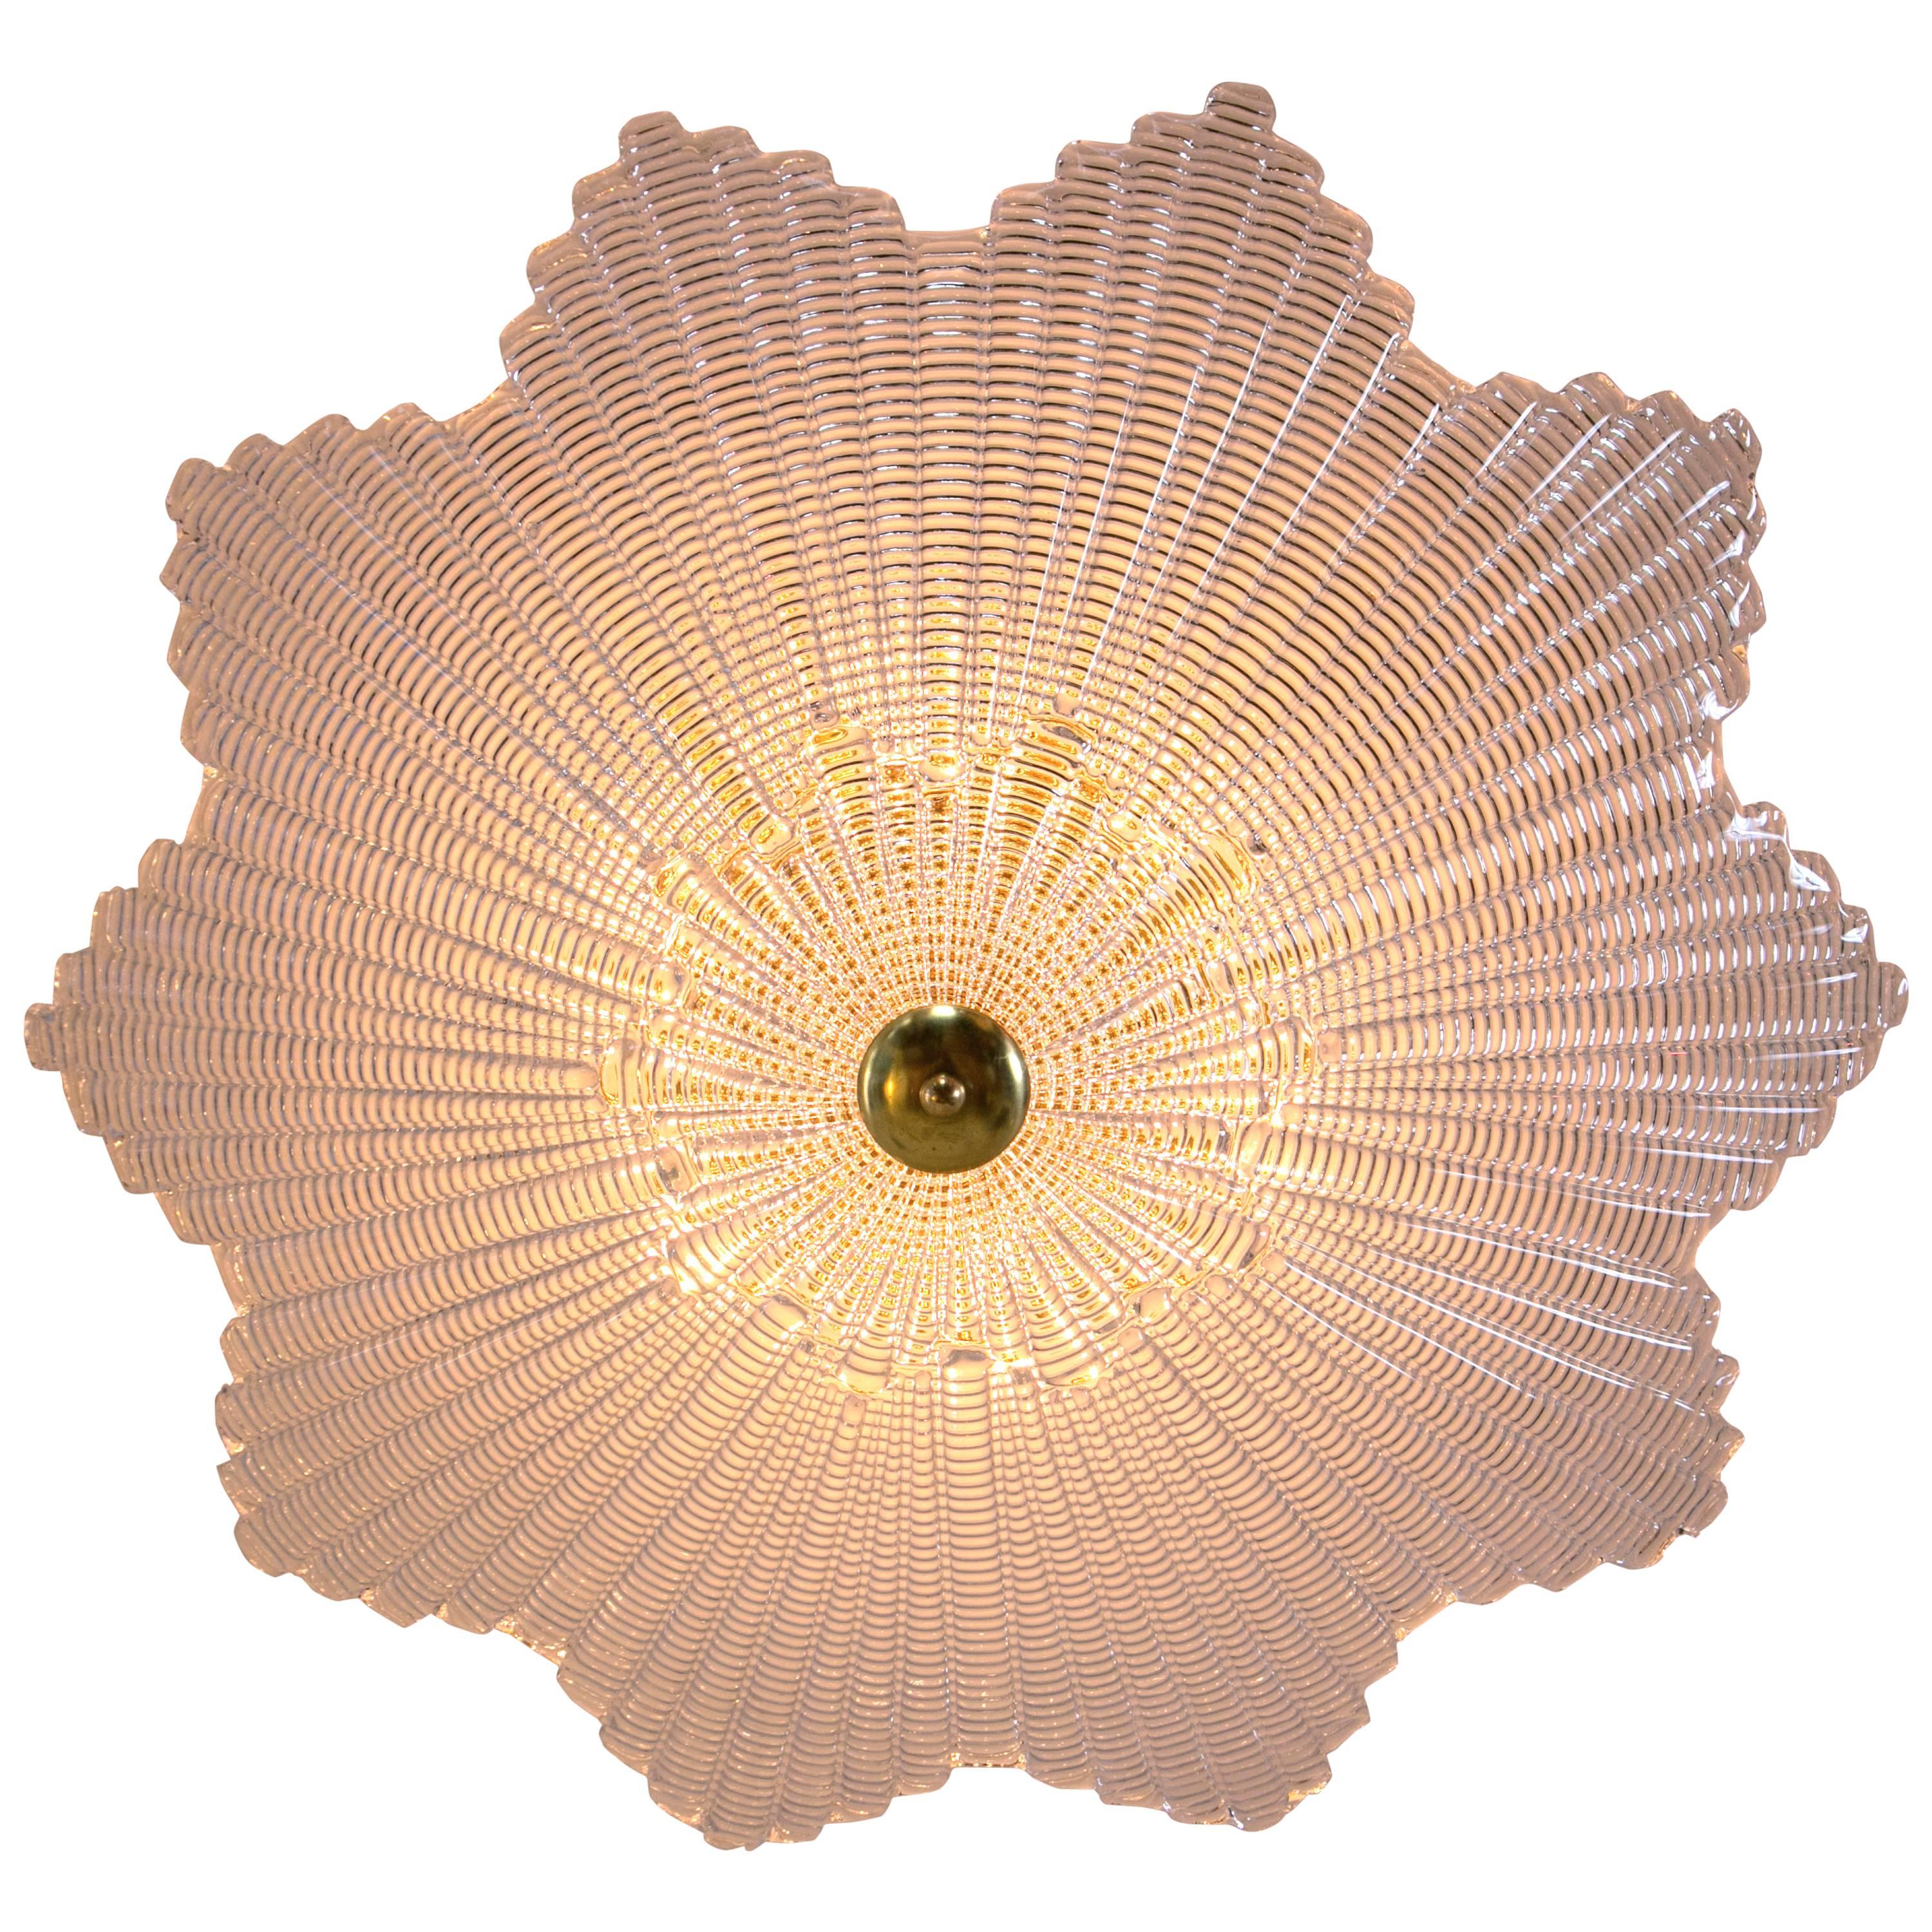 Elegant textured glass blown star-shaped ceiling fixture newly electrified with new 5 light solid unlacquered brass hardware which is customized to your overall desired drop. Lamping is customized upon order. Electrification is to US code, all parts